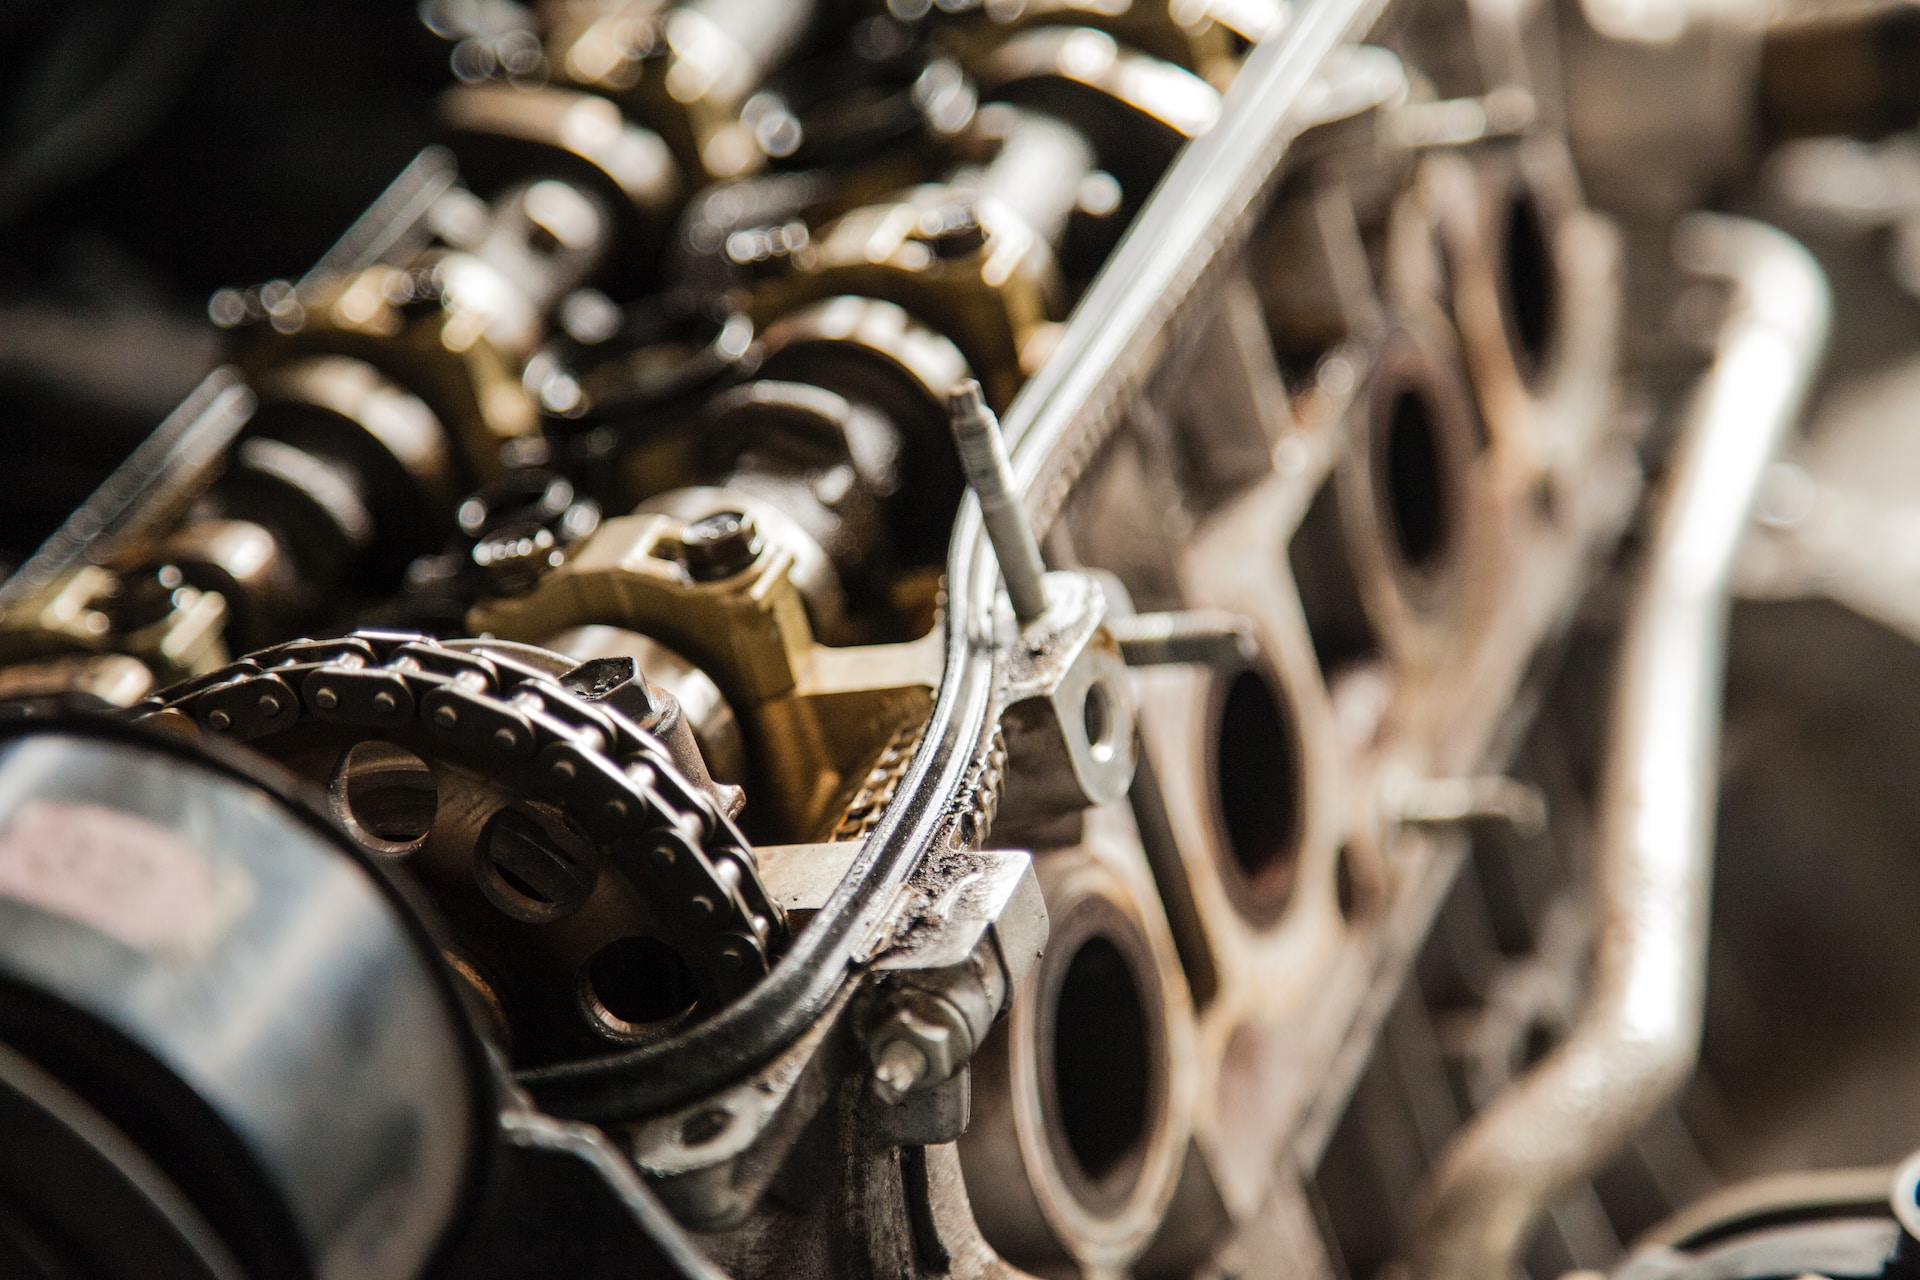 Image of an engine that may need parts cleaning or degreasing.